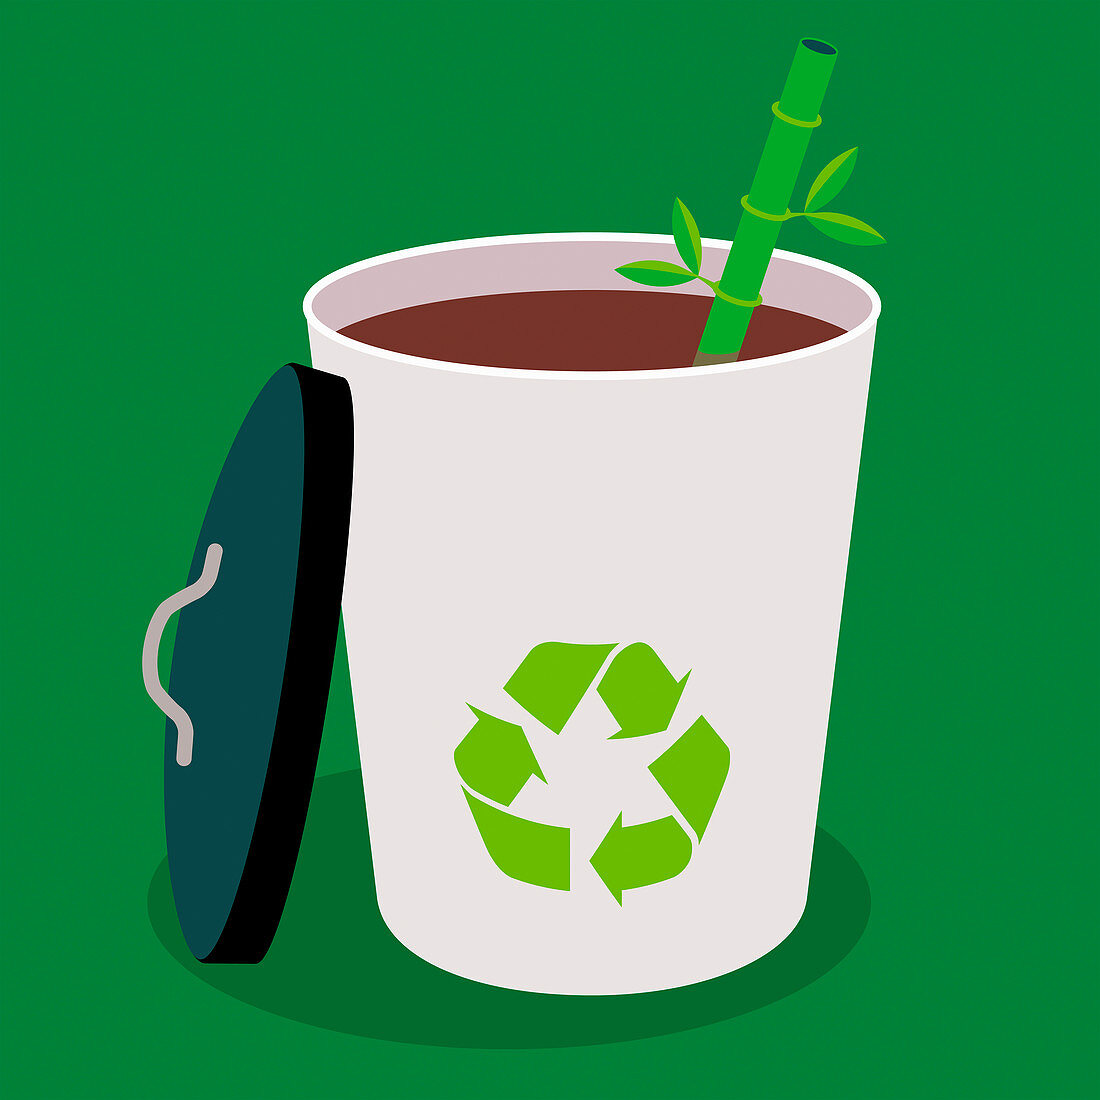 Recyclable cup and straw, illustration